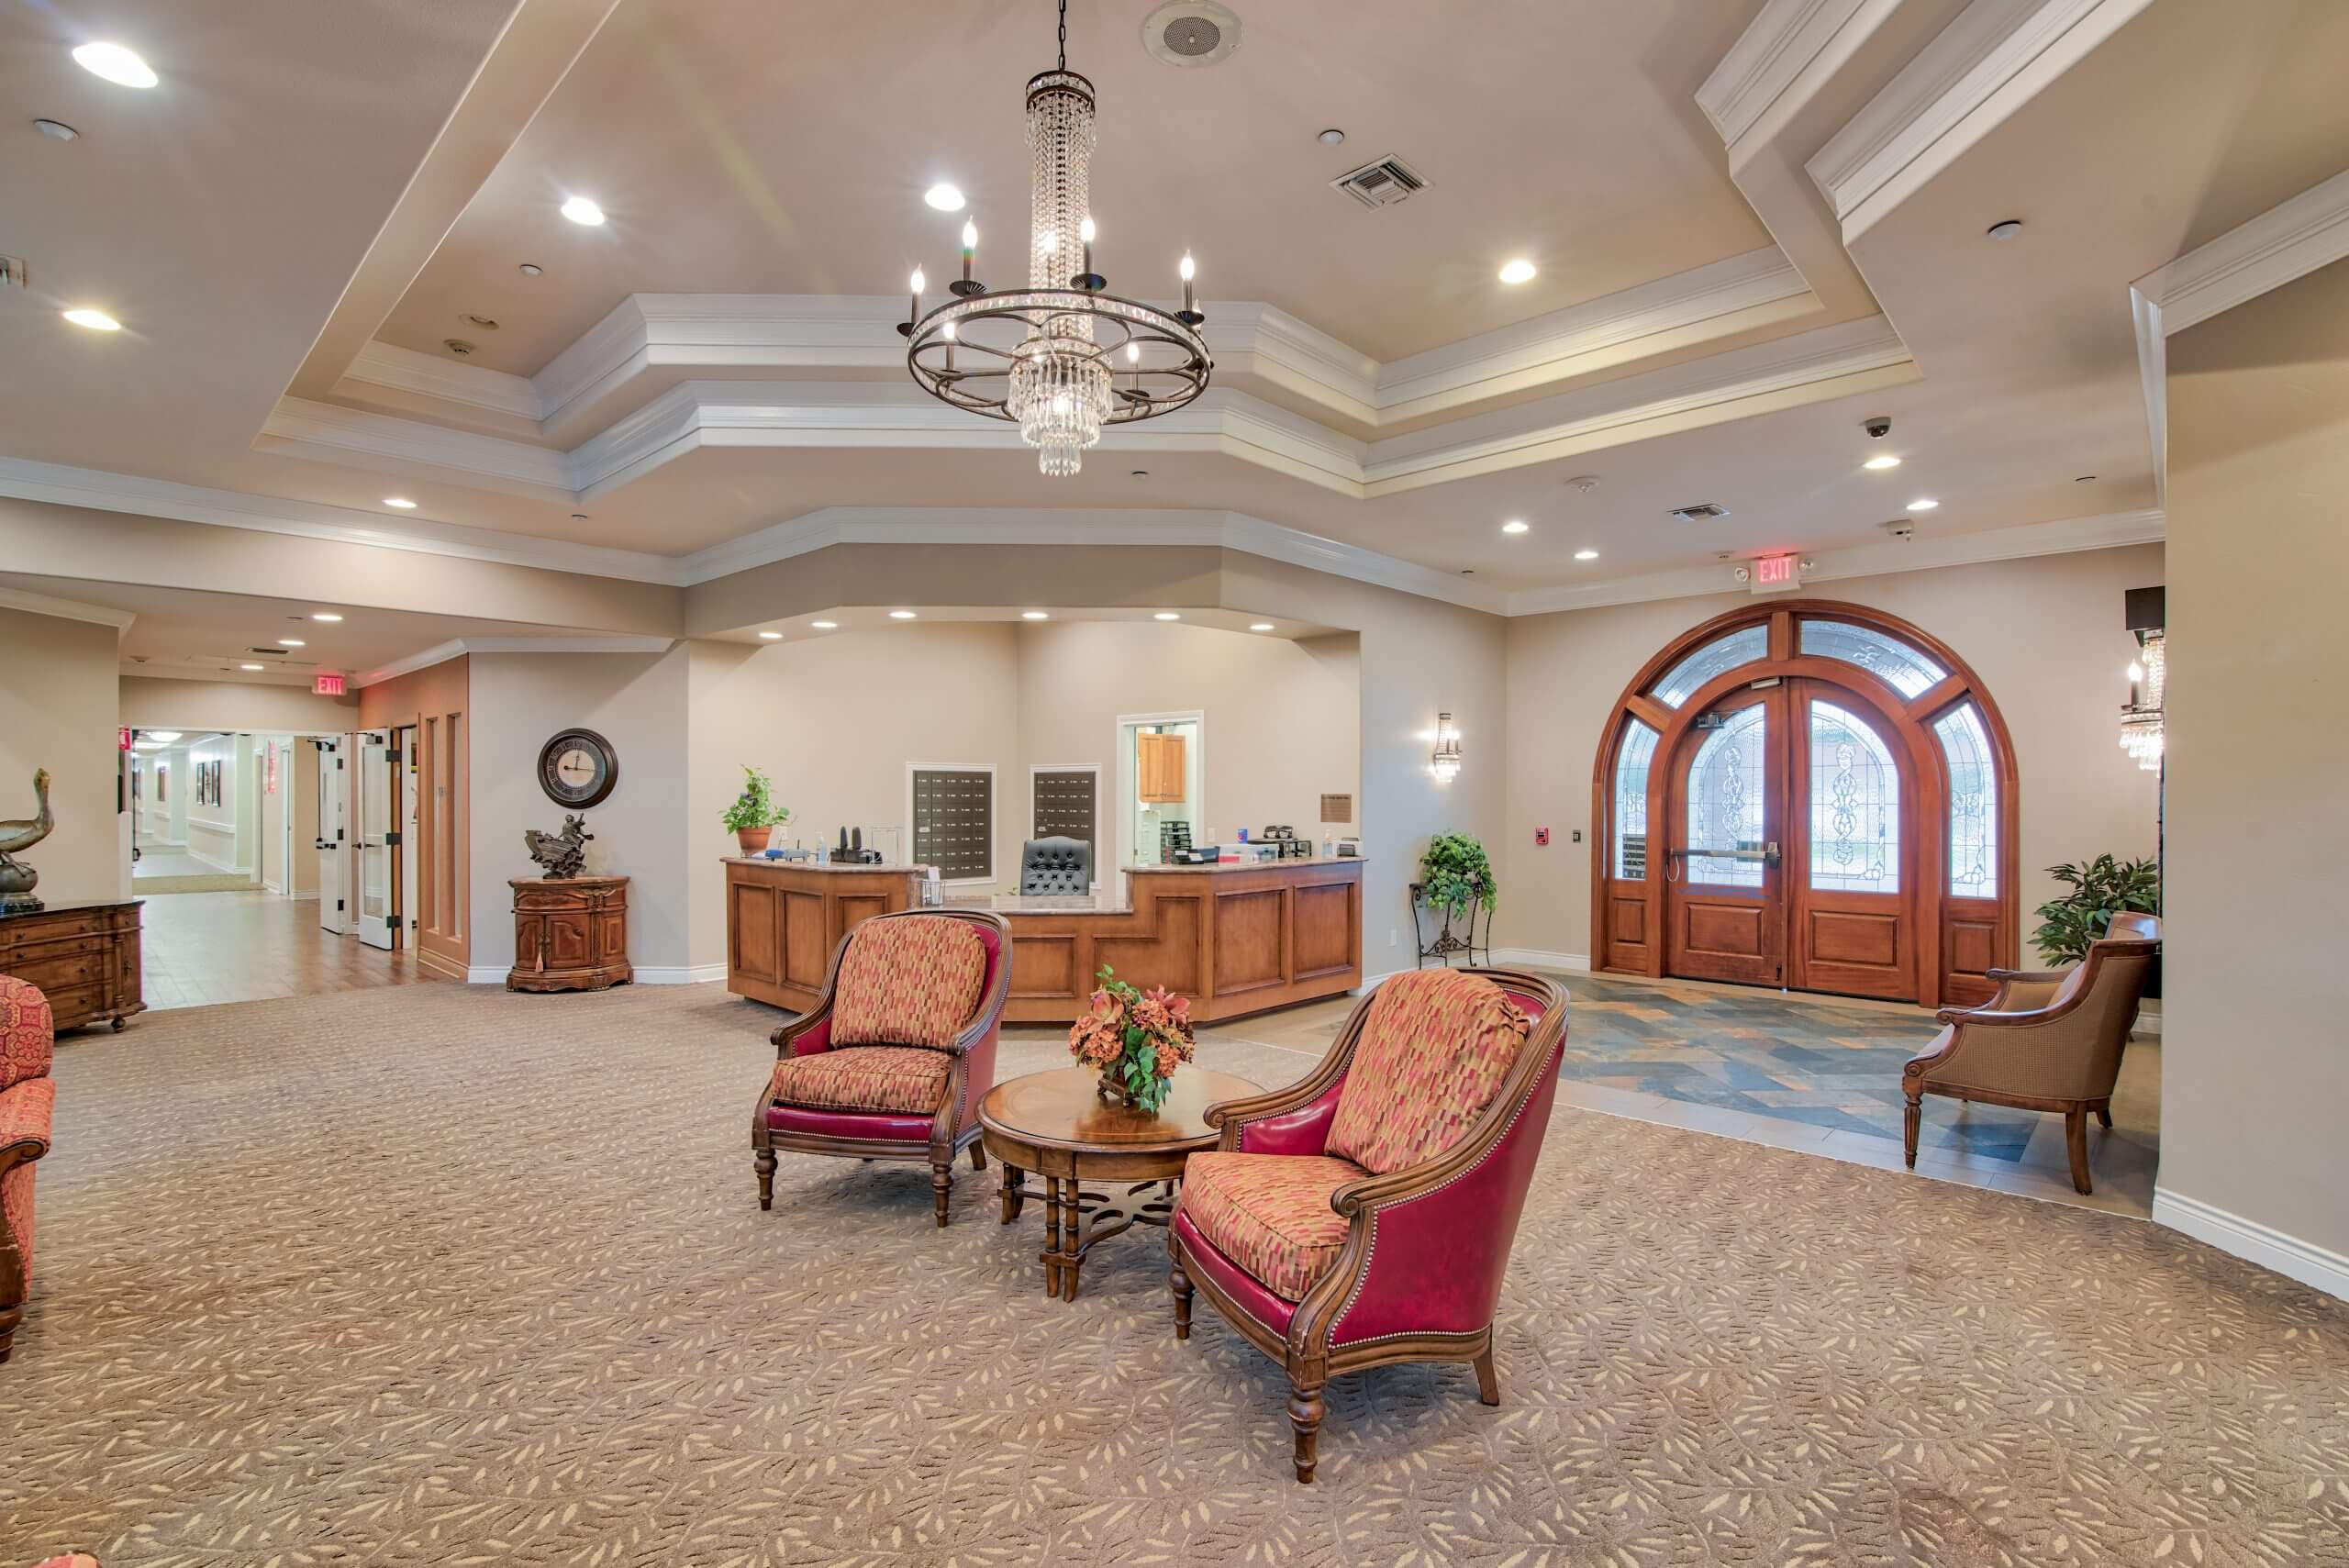 Lounge area at Pelican Bay Assisted Living and memory care community in Beaumont, TX